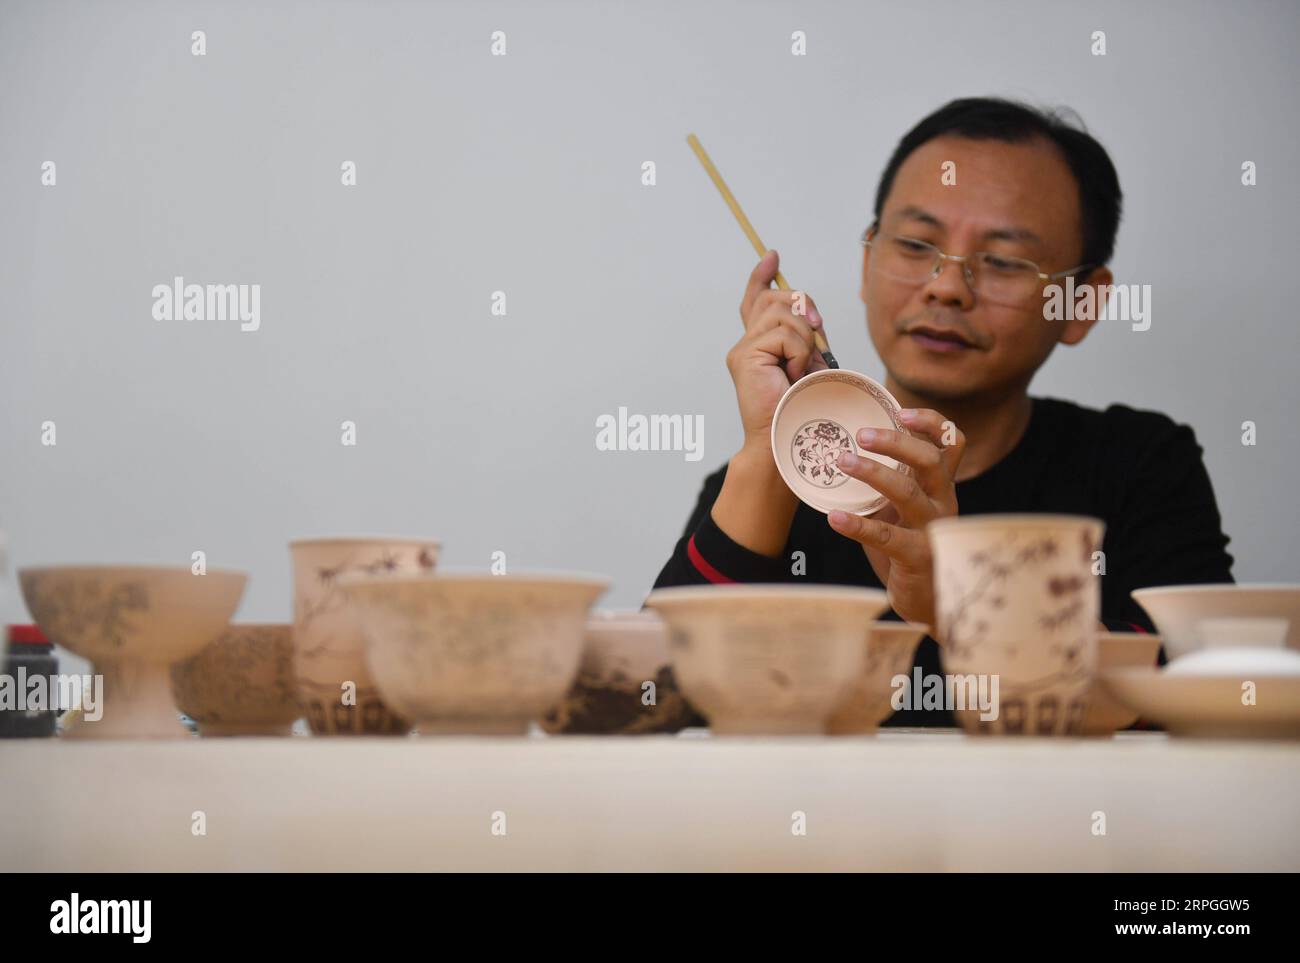 191016 -- NANCHANG, Oct. 16, 2019 -- A member of the team Kuaixueshiqing paints on a piece of porcelain work in Jingdezhen, east China s Jiangxi Province, Oct. 15, 2019. Egg shell porcelain, a renowned kind of traditional porcelain work produced in Jingdezhen of Jiangxi, is famous for its thin and transparent body which makes it special. Wang Minhui, 40, is head of the egg shell porcelain making team called Kuaixueshiqing . Wang and his two partners Du Xingyu and Liu Zhen, who take interest in porcelain, founded the team in 2010. The team, now having over 20 members, has insisted in striving f Stock Photo